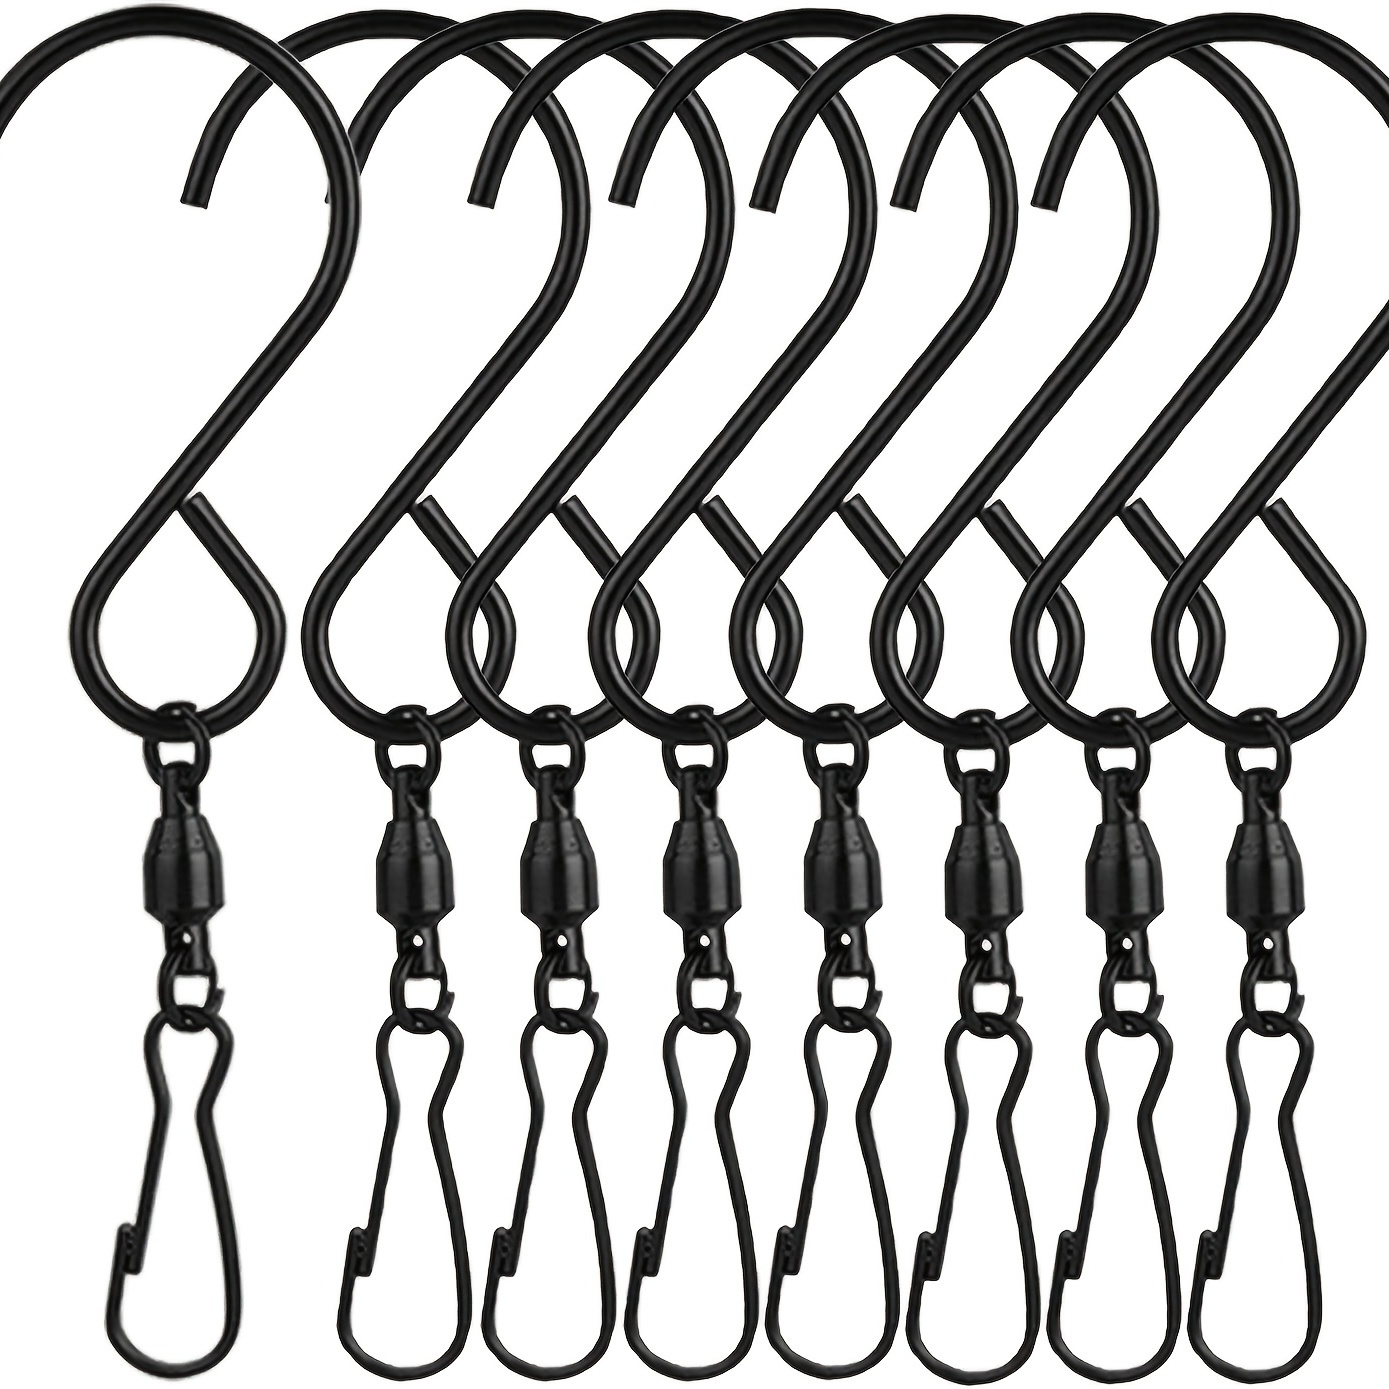 

8 Packs Swivel Wind Chime Hooks S-type Stainless Steel Swivel Bearing Hooks For Hanging Wind Chimes, Bird Feeder, Crystal Party Supplies (black)